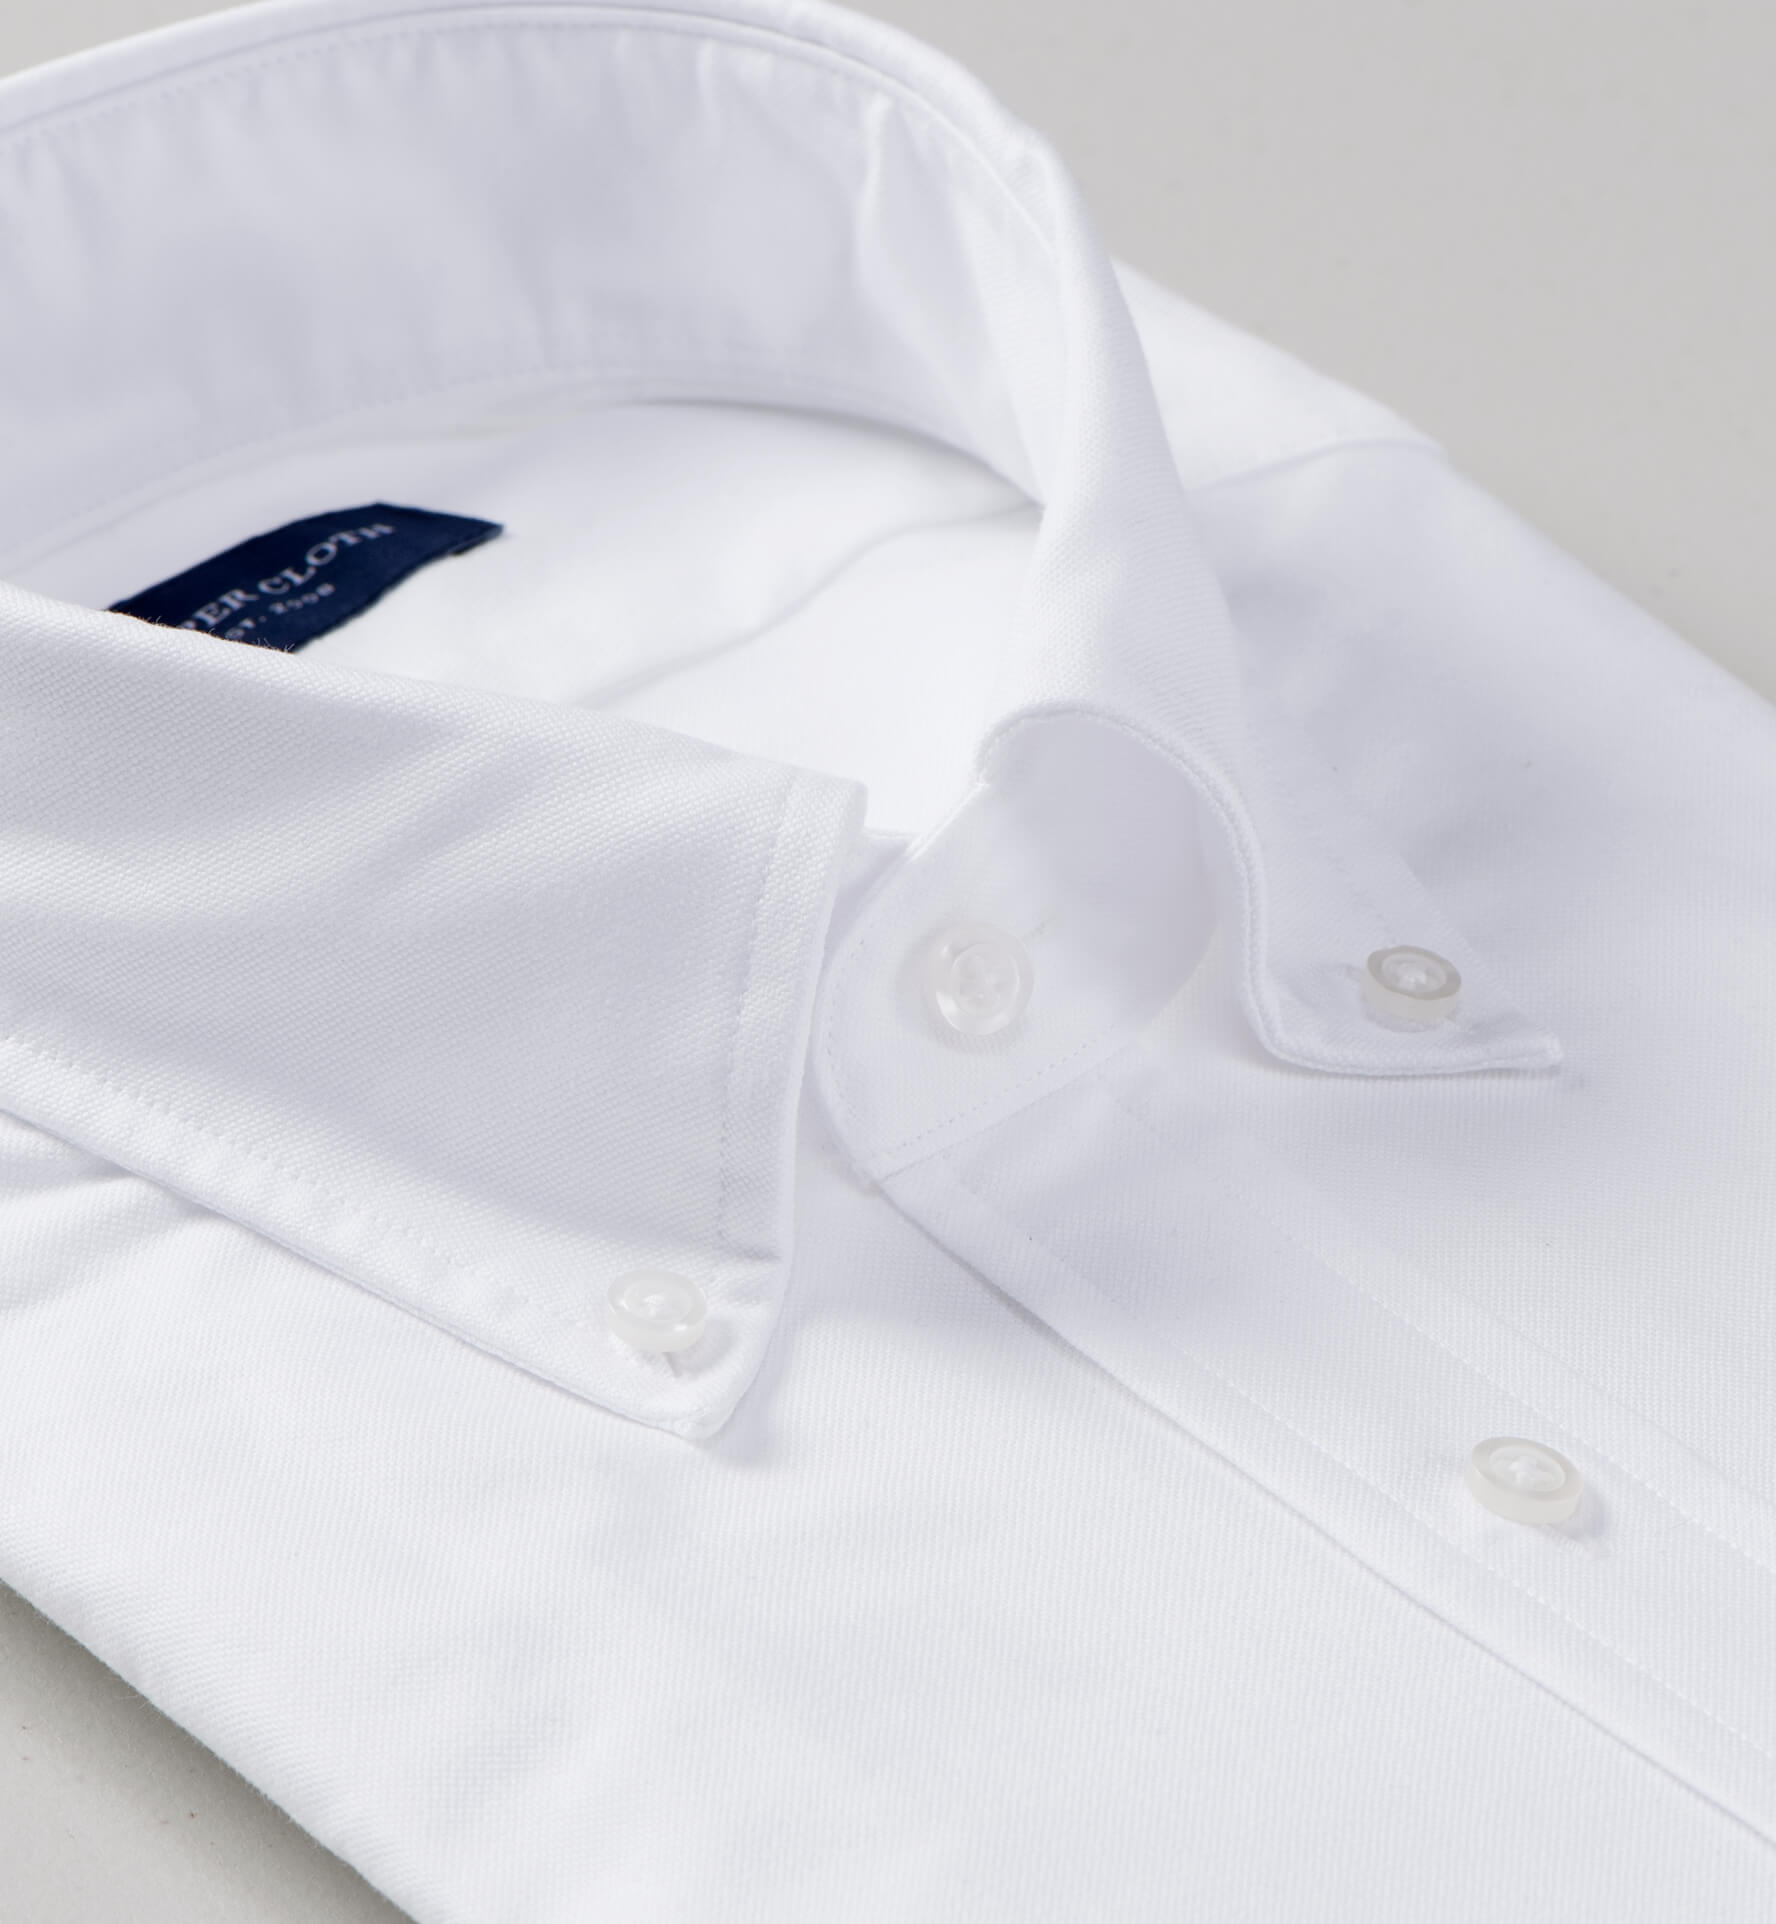 White Heavy Oxford Fitted Dress Shirt by Proper Cloth